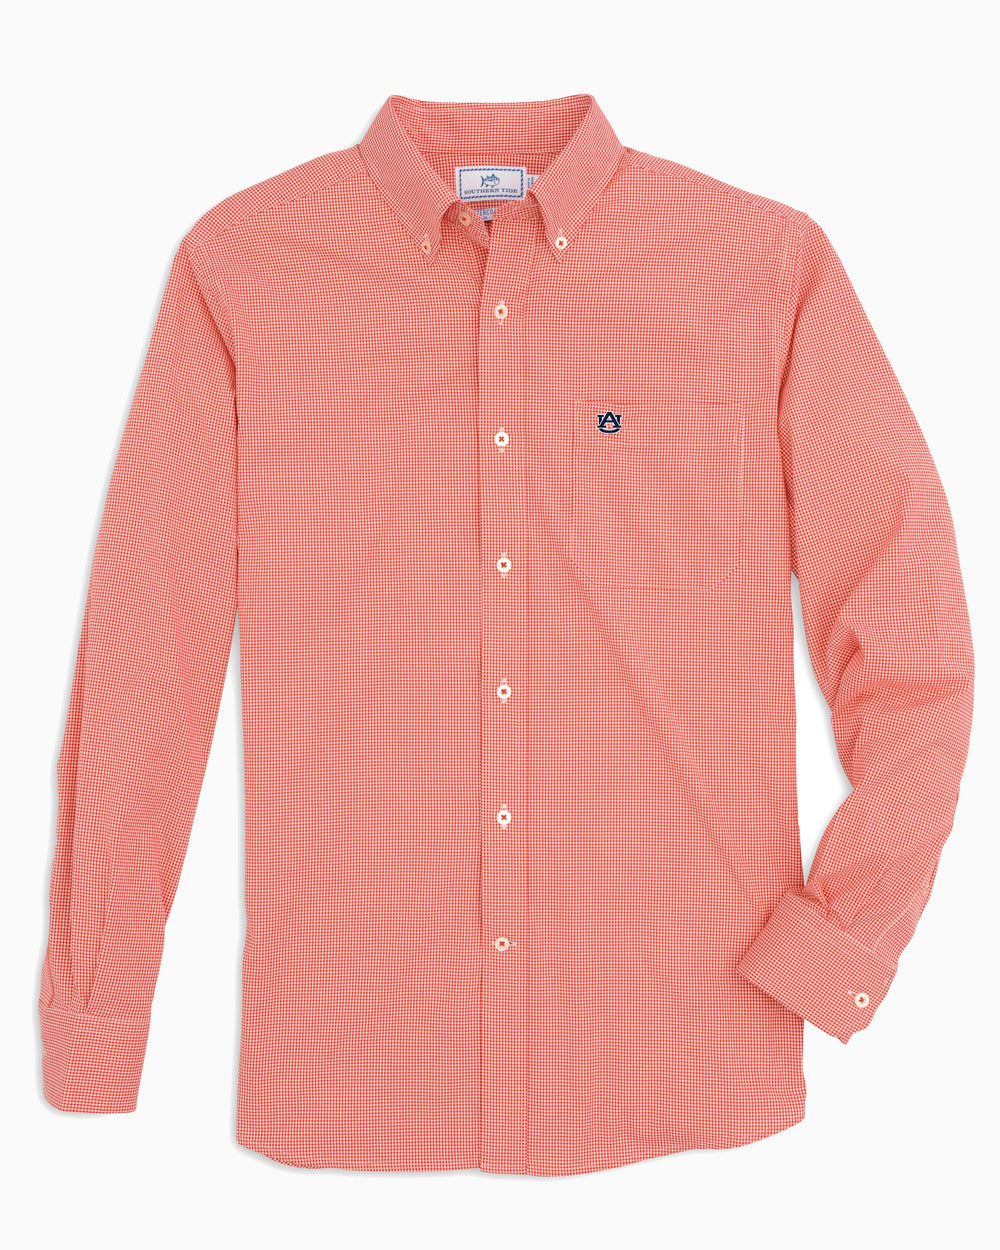 The front view of the Men's Orange Auburn Tigers Gingham Button Down Shirt by Southern Tide - Endzone Orange